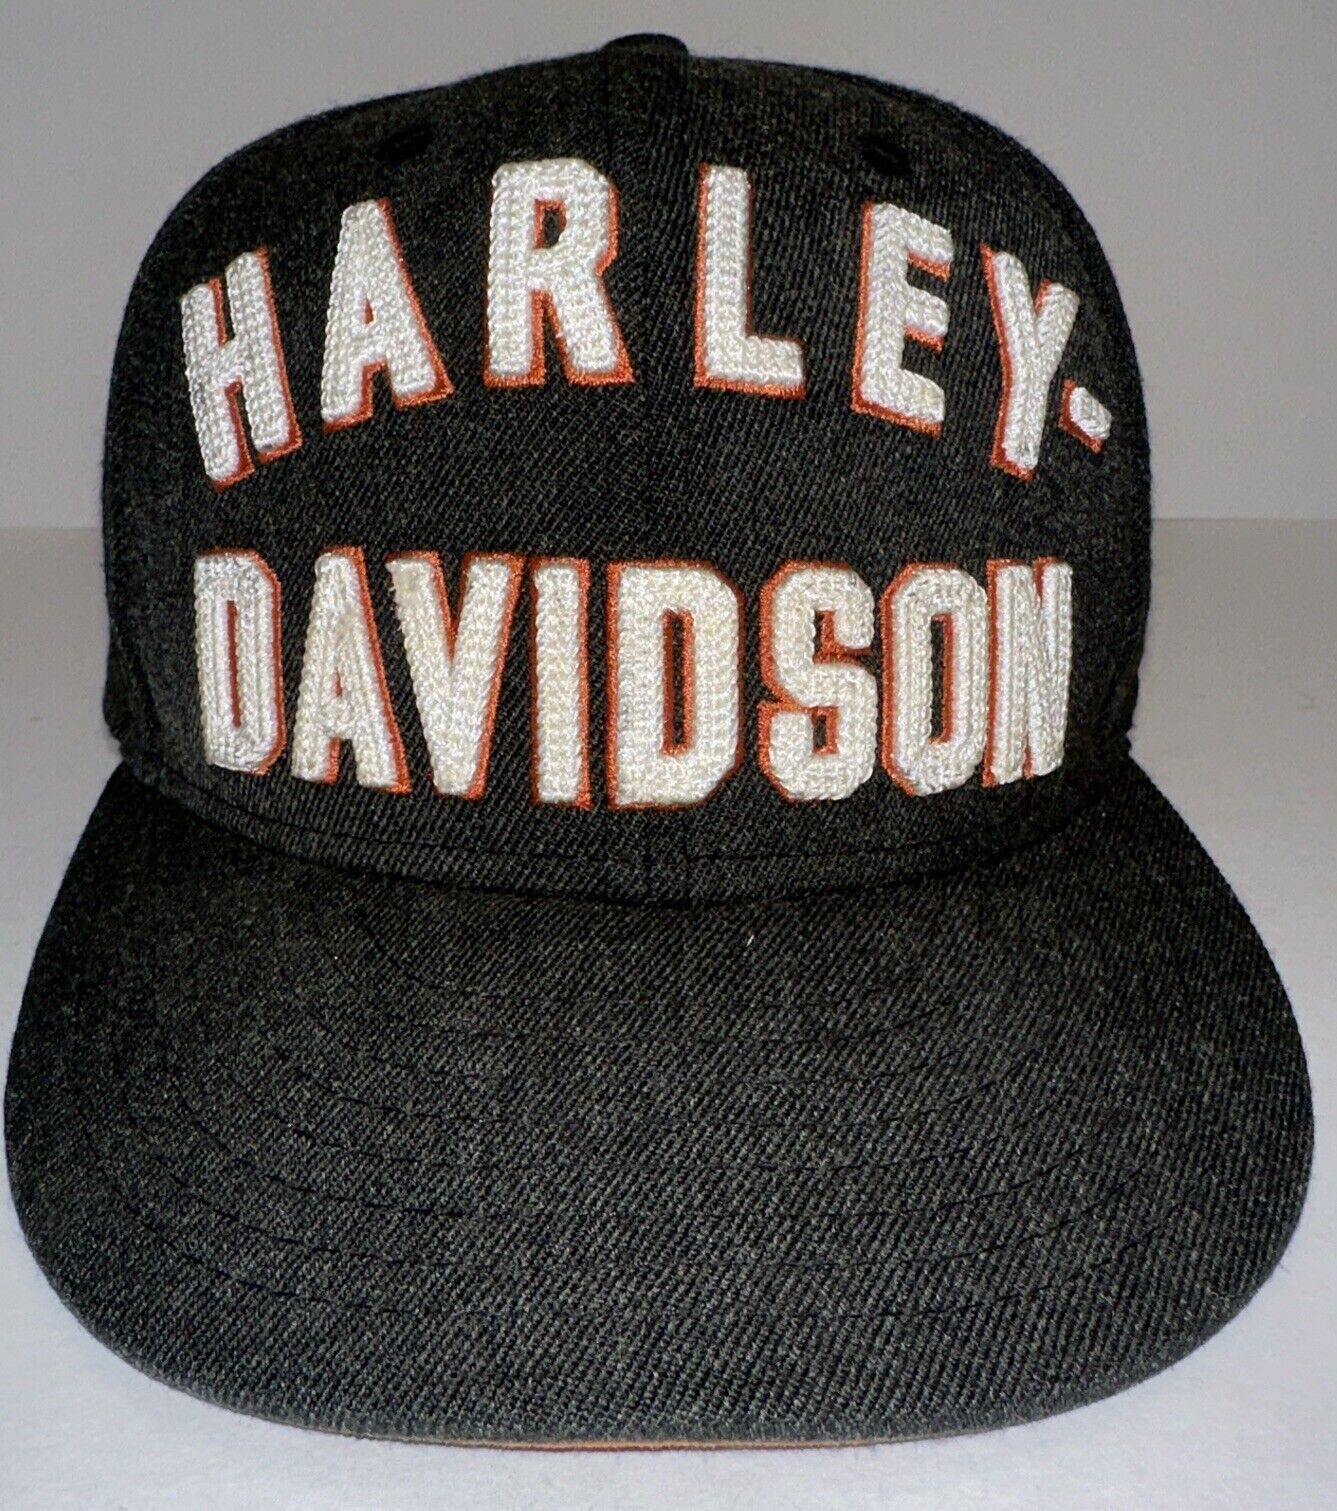 Harley Davidson Motorcycles Embroidered Fitted New Era 5950 Hat Cap Sz XL 7.5